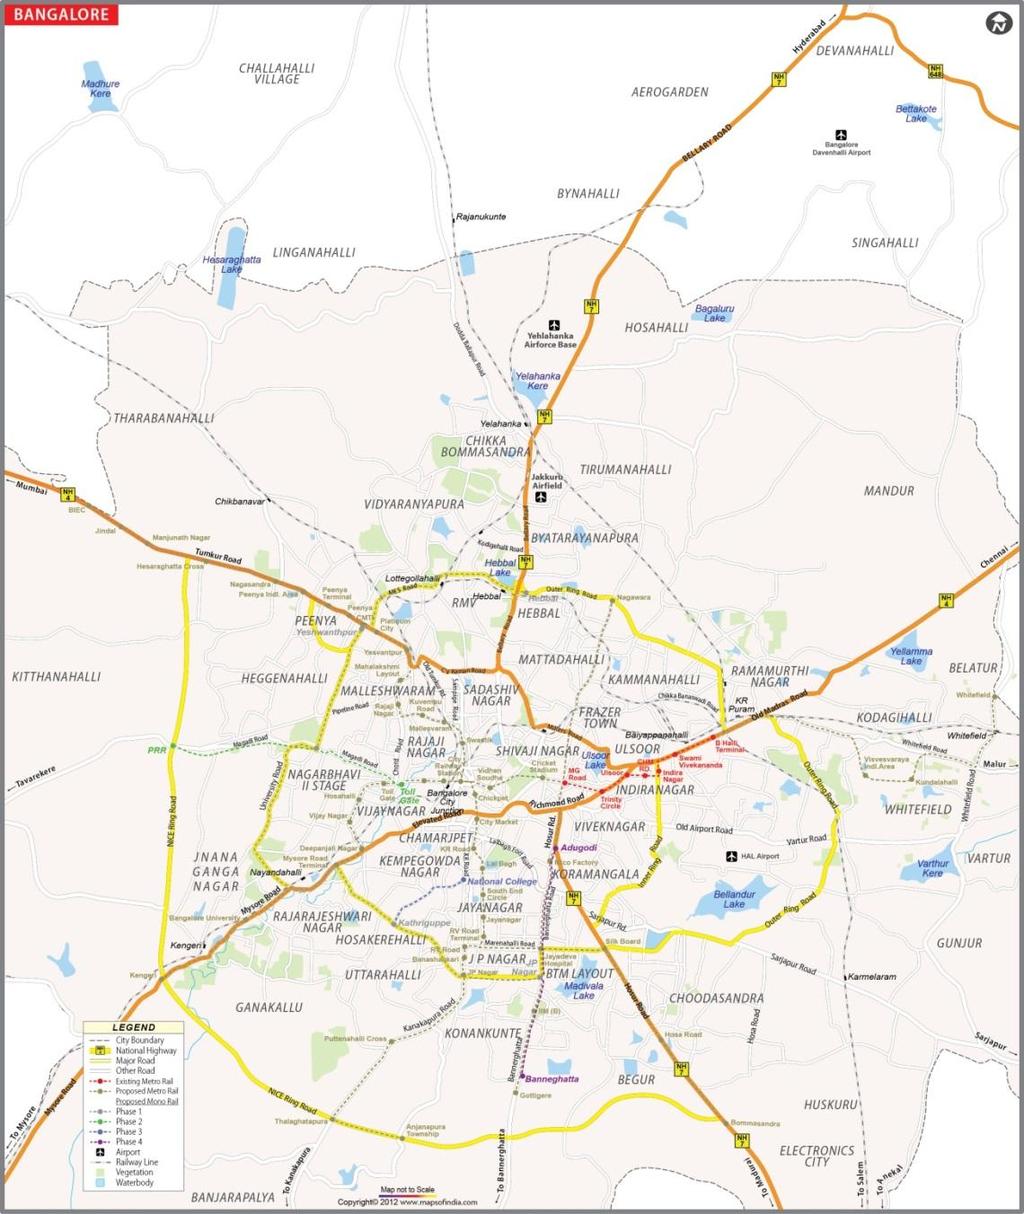 1 Bangalore City Overview City Map In the last decade, the city has witnessed a remarkable transition as a major IT/ITeS & Biotech destination in India City Overview From being a pensioner s